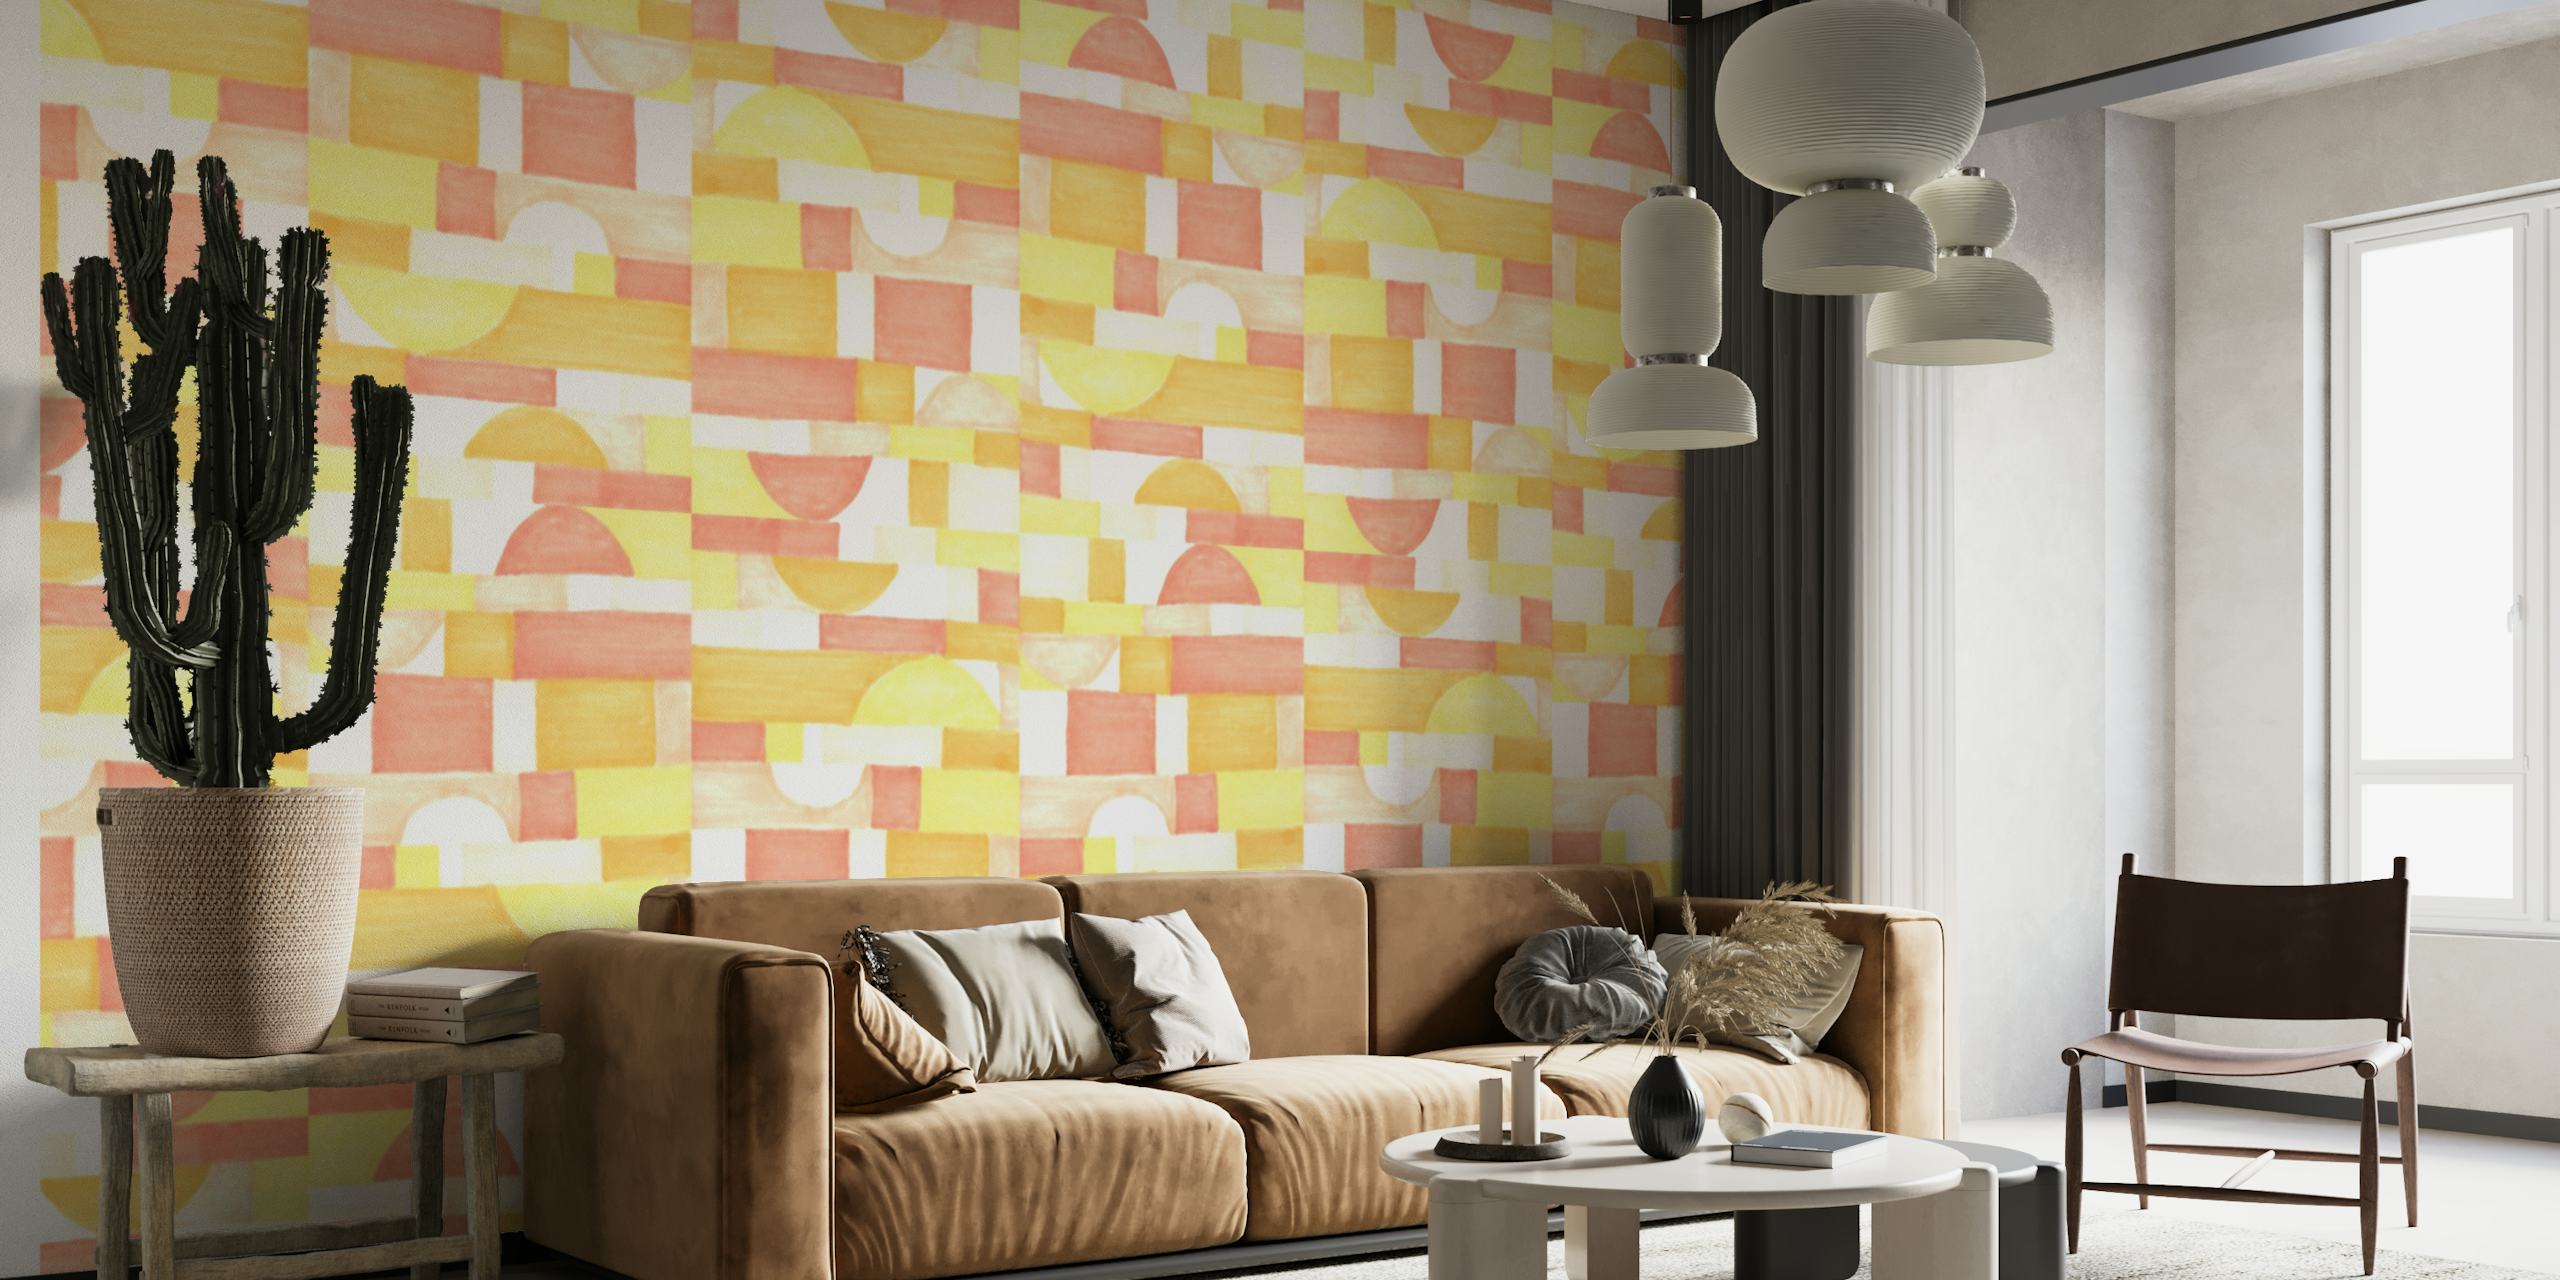 Abstract orange and yellow geometric shapes wall mural